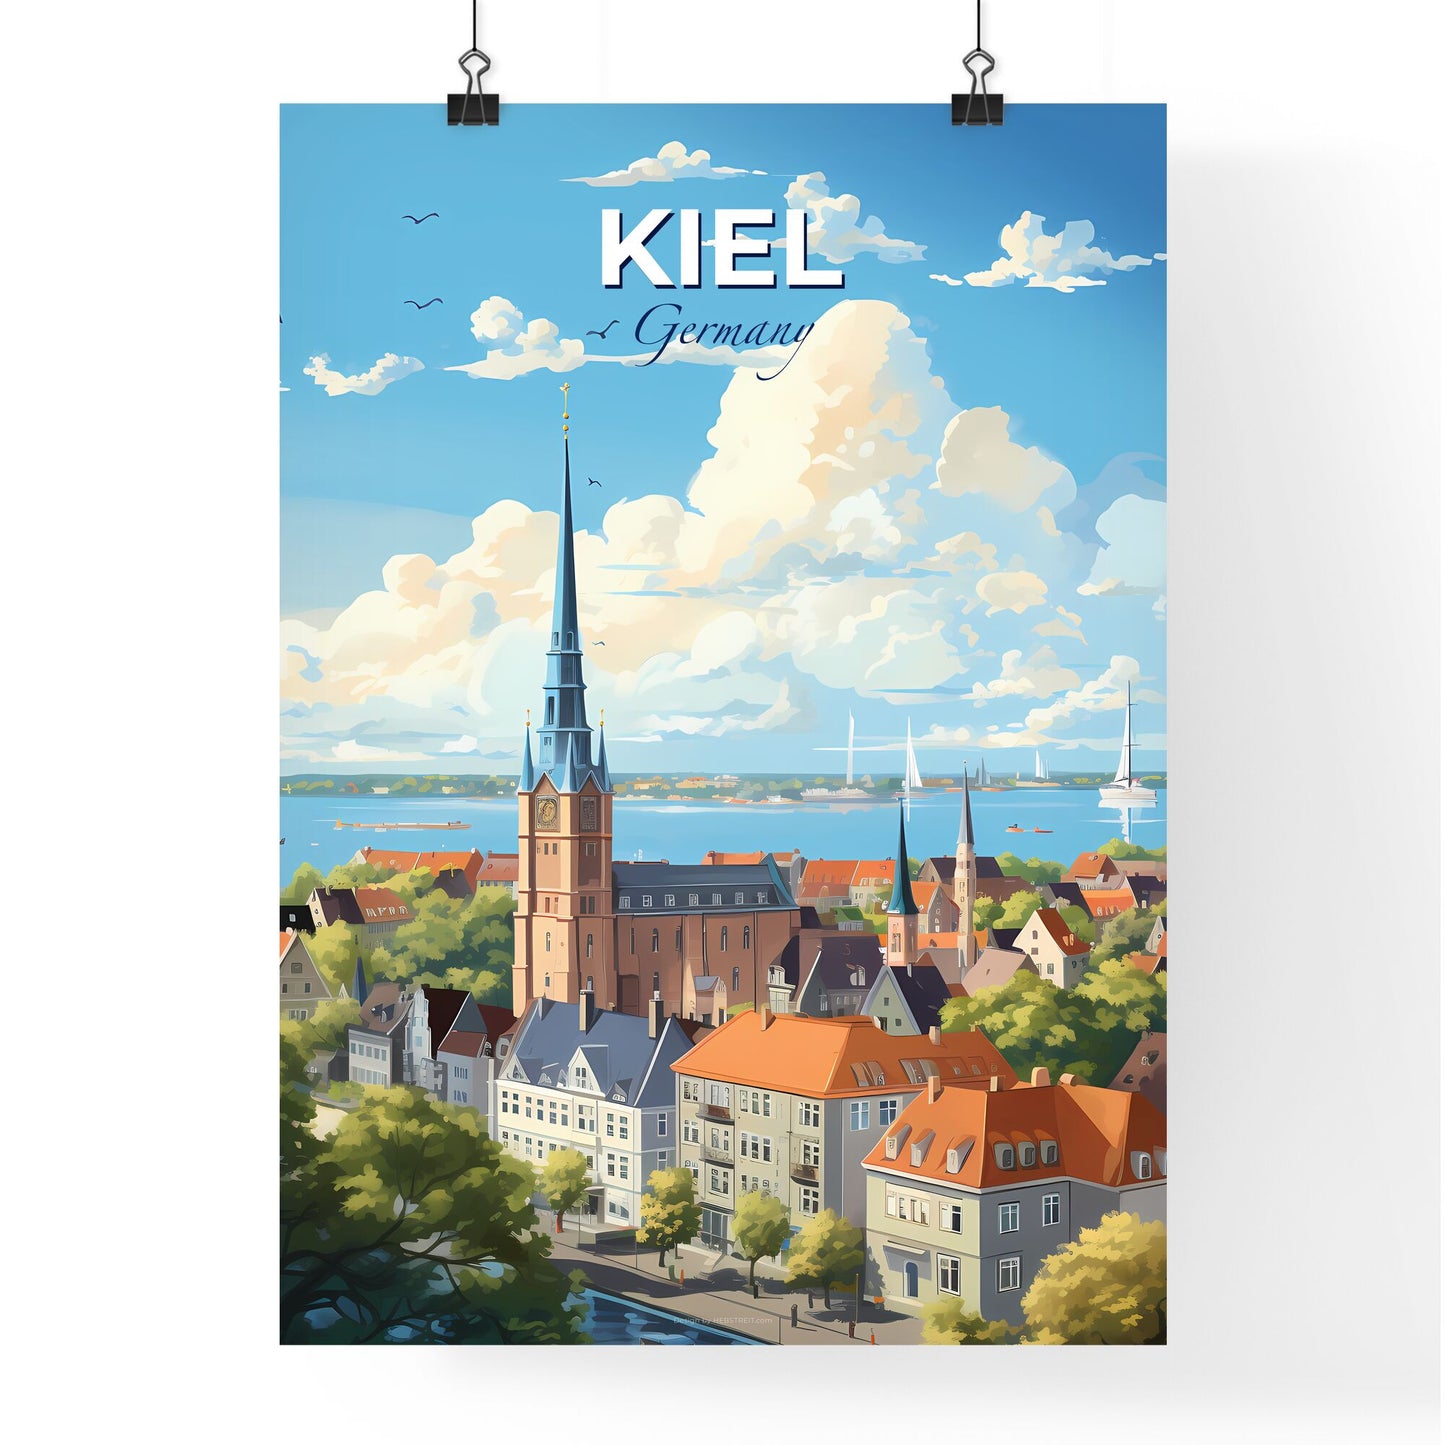 Kiel Germany Skyline - A City With A Tall Tower And Trees And Water - Customizable Travel Gift Default Title